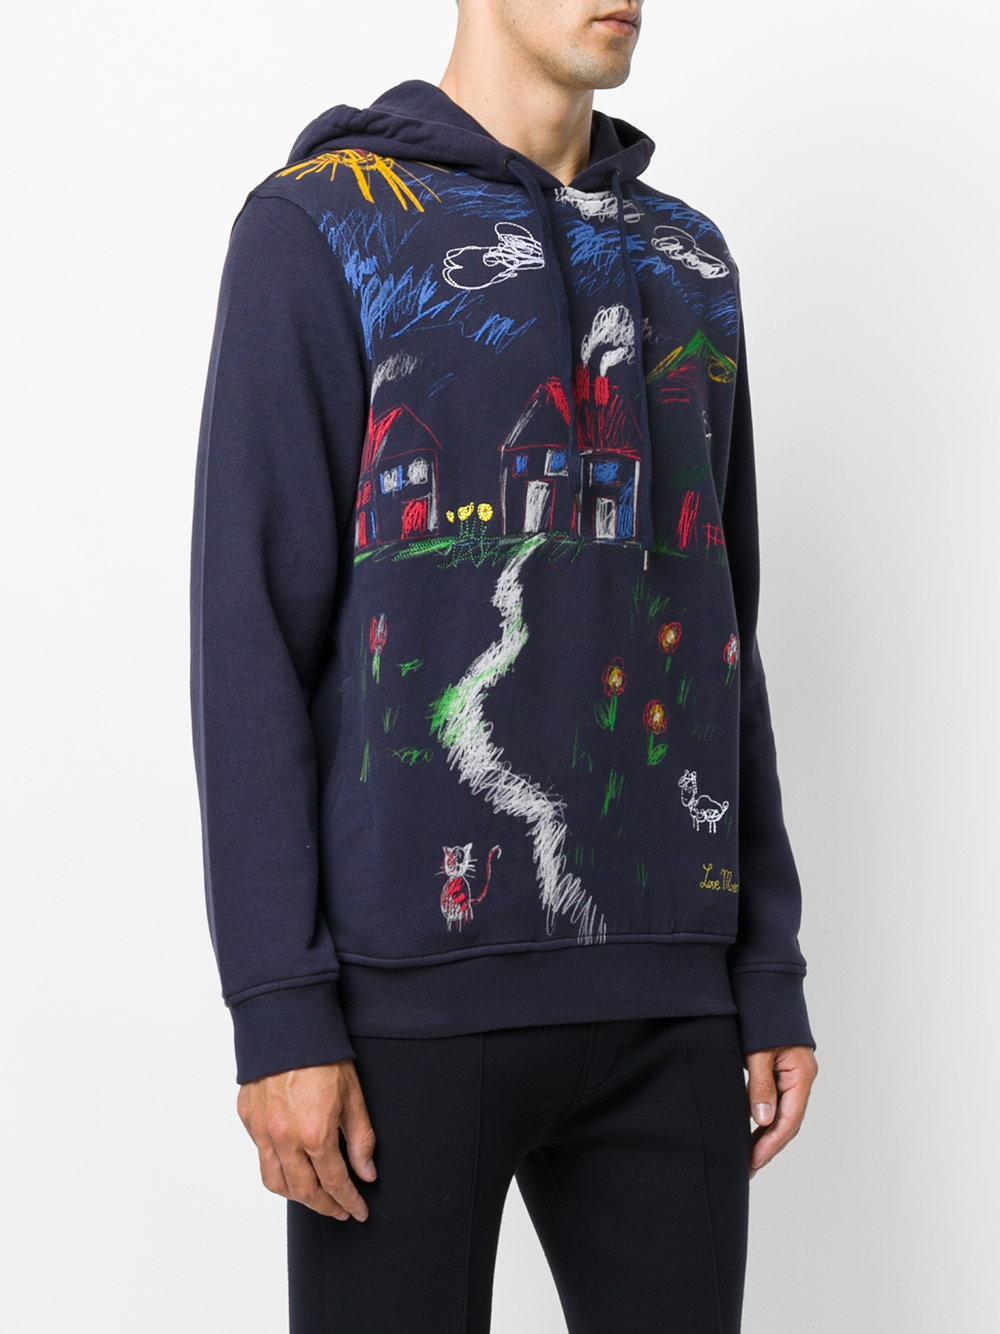 Lyst - Love moschino Hooded Printed Sweatshirt in Blue for Men